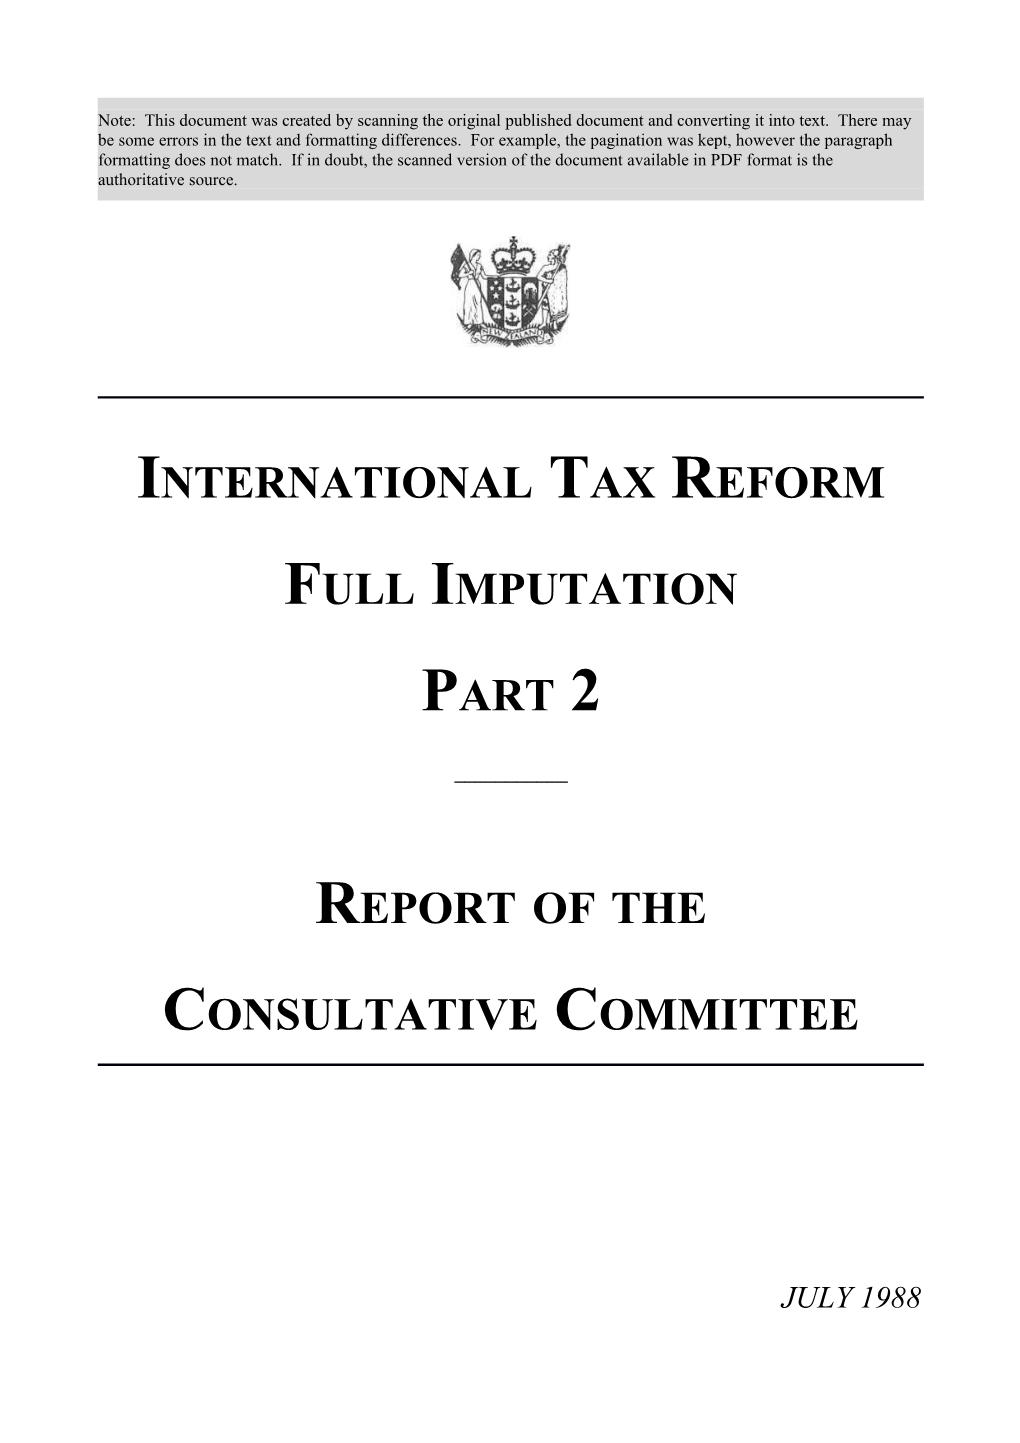 International Tax Reform - Full Imputation - Part 2 - Report of the Consultative Committee